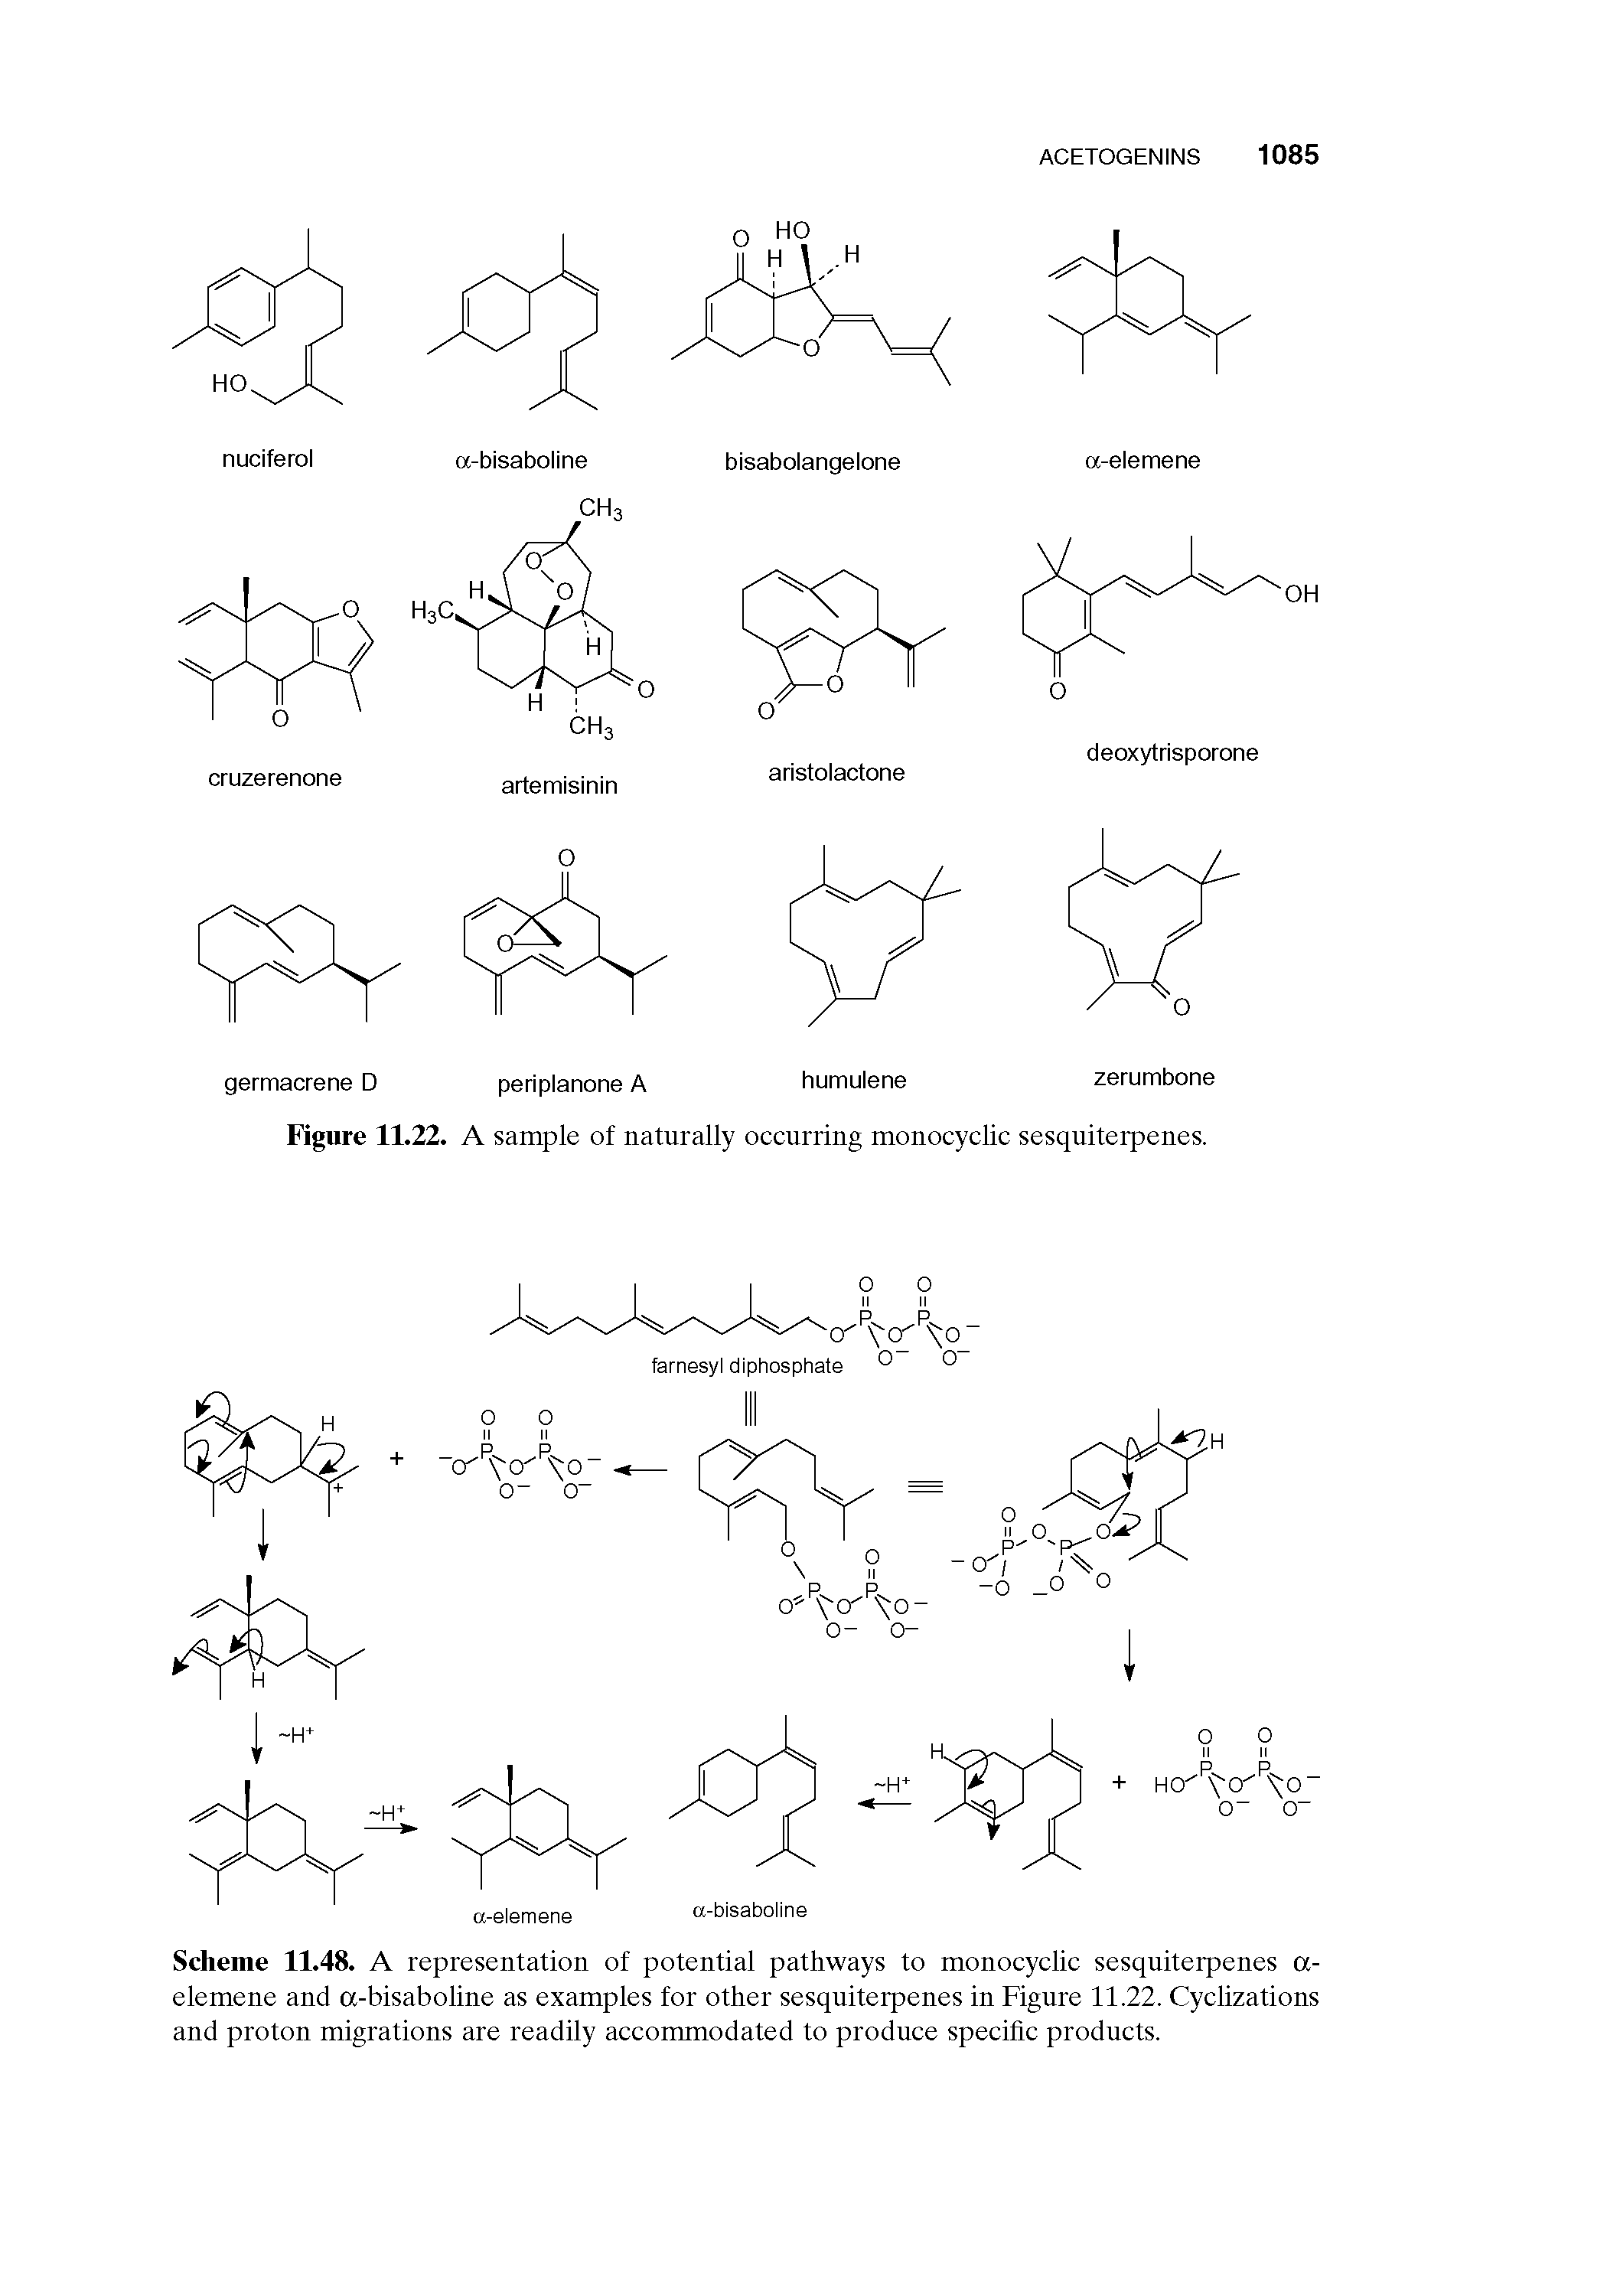 Figure 11.22. A sample of naturally occurring monocyclic sesquiterpenes.